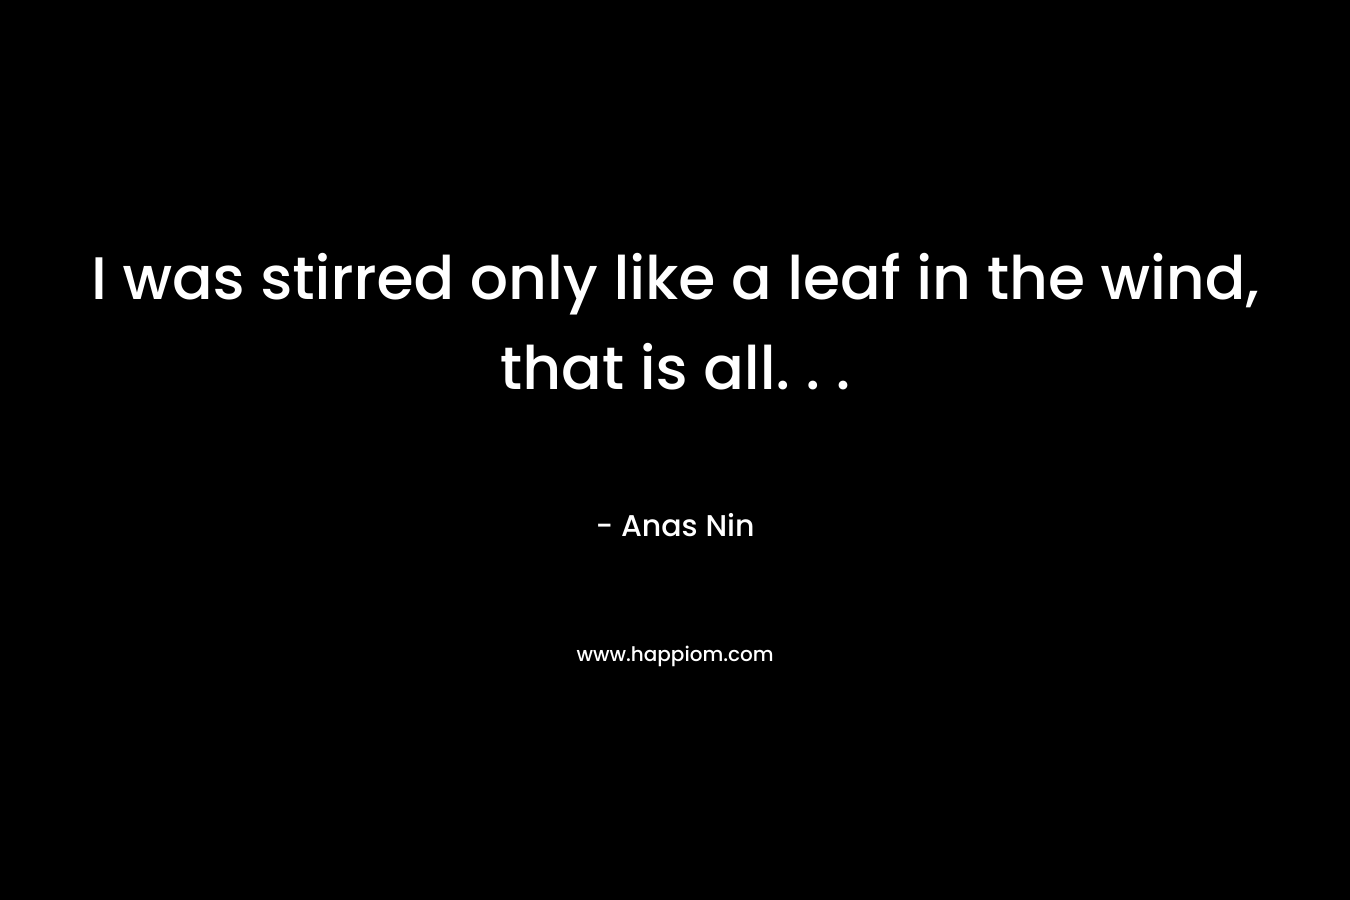 I was stirred only like a leaf in the wind, that is all. . .